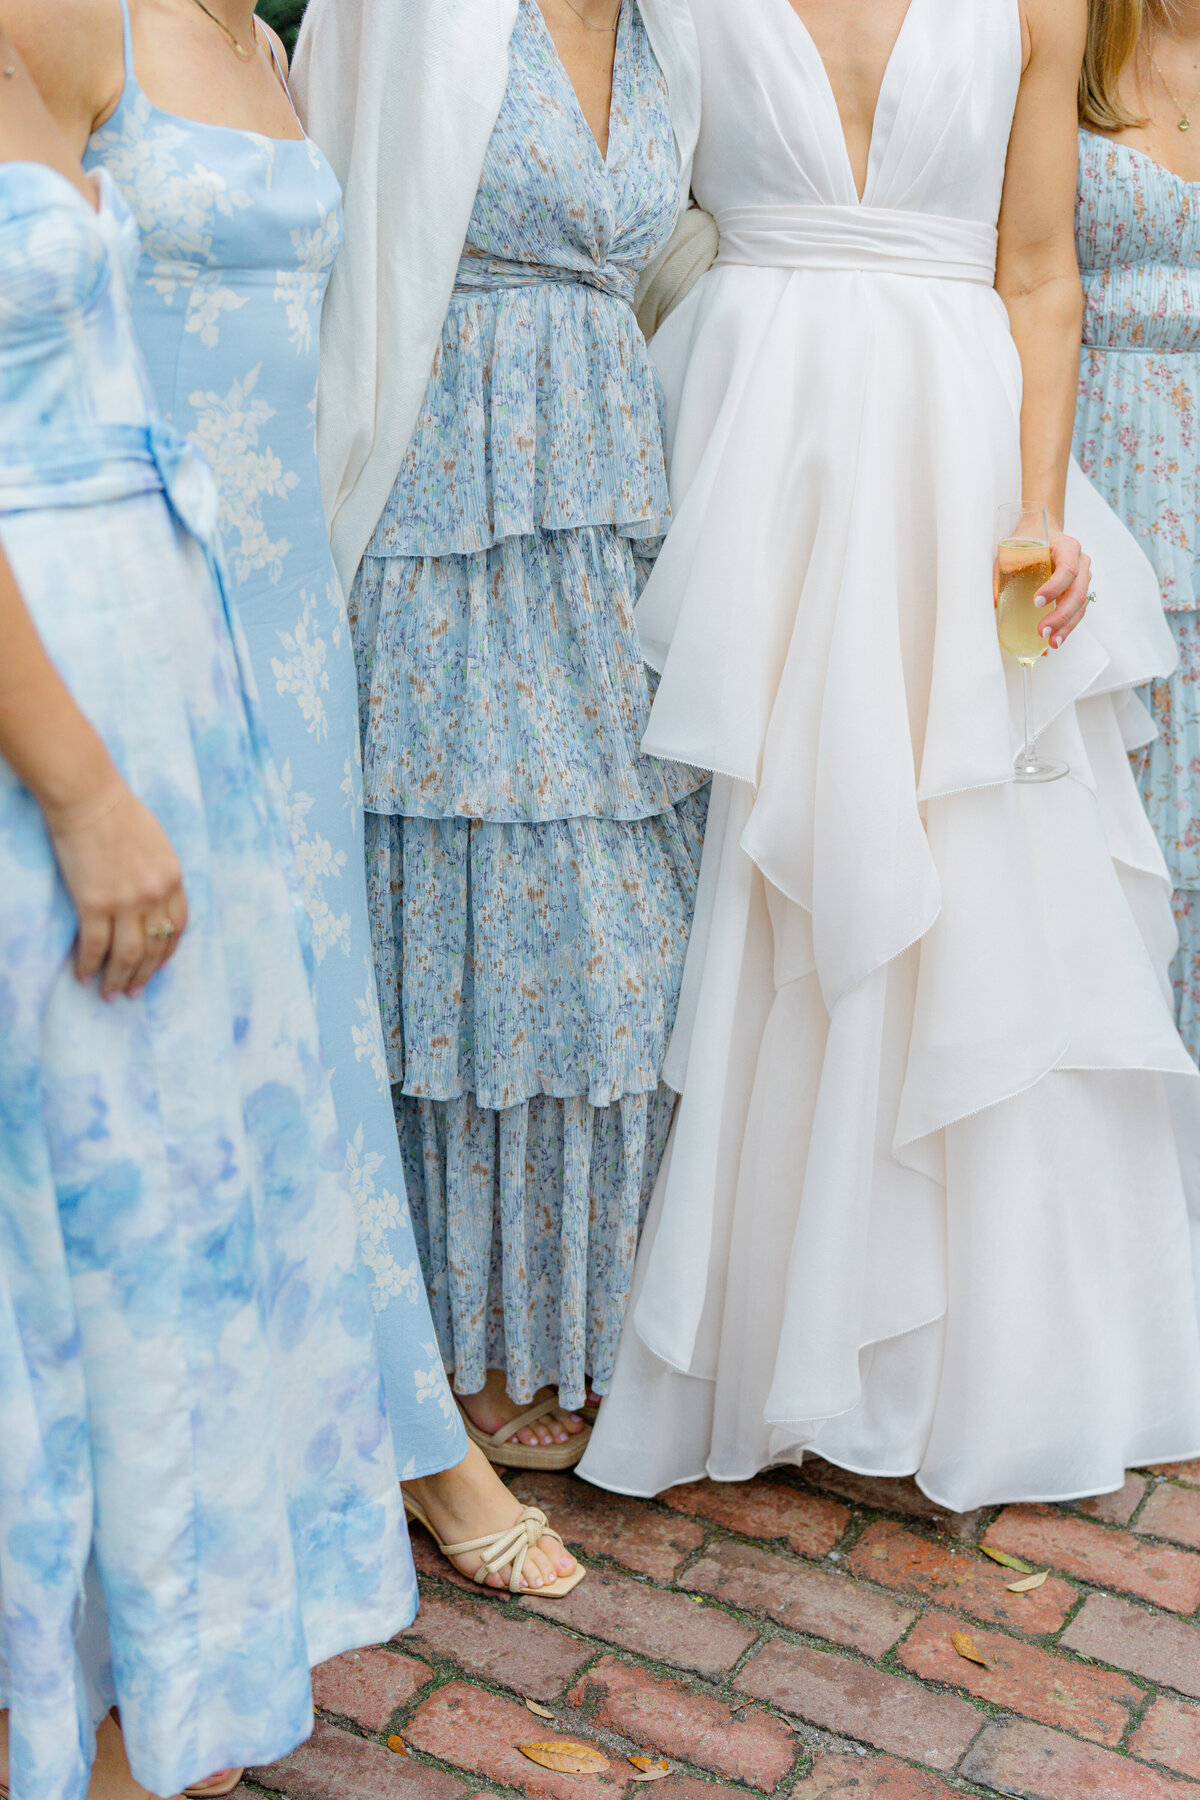 lowndes_grove_blue_mismatched_dresses_bridal_party_wedding_Kailee_DiMeglio_Photography-945